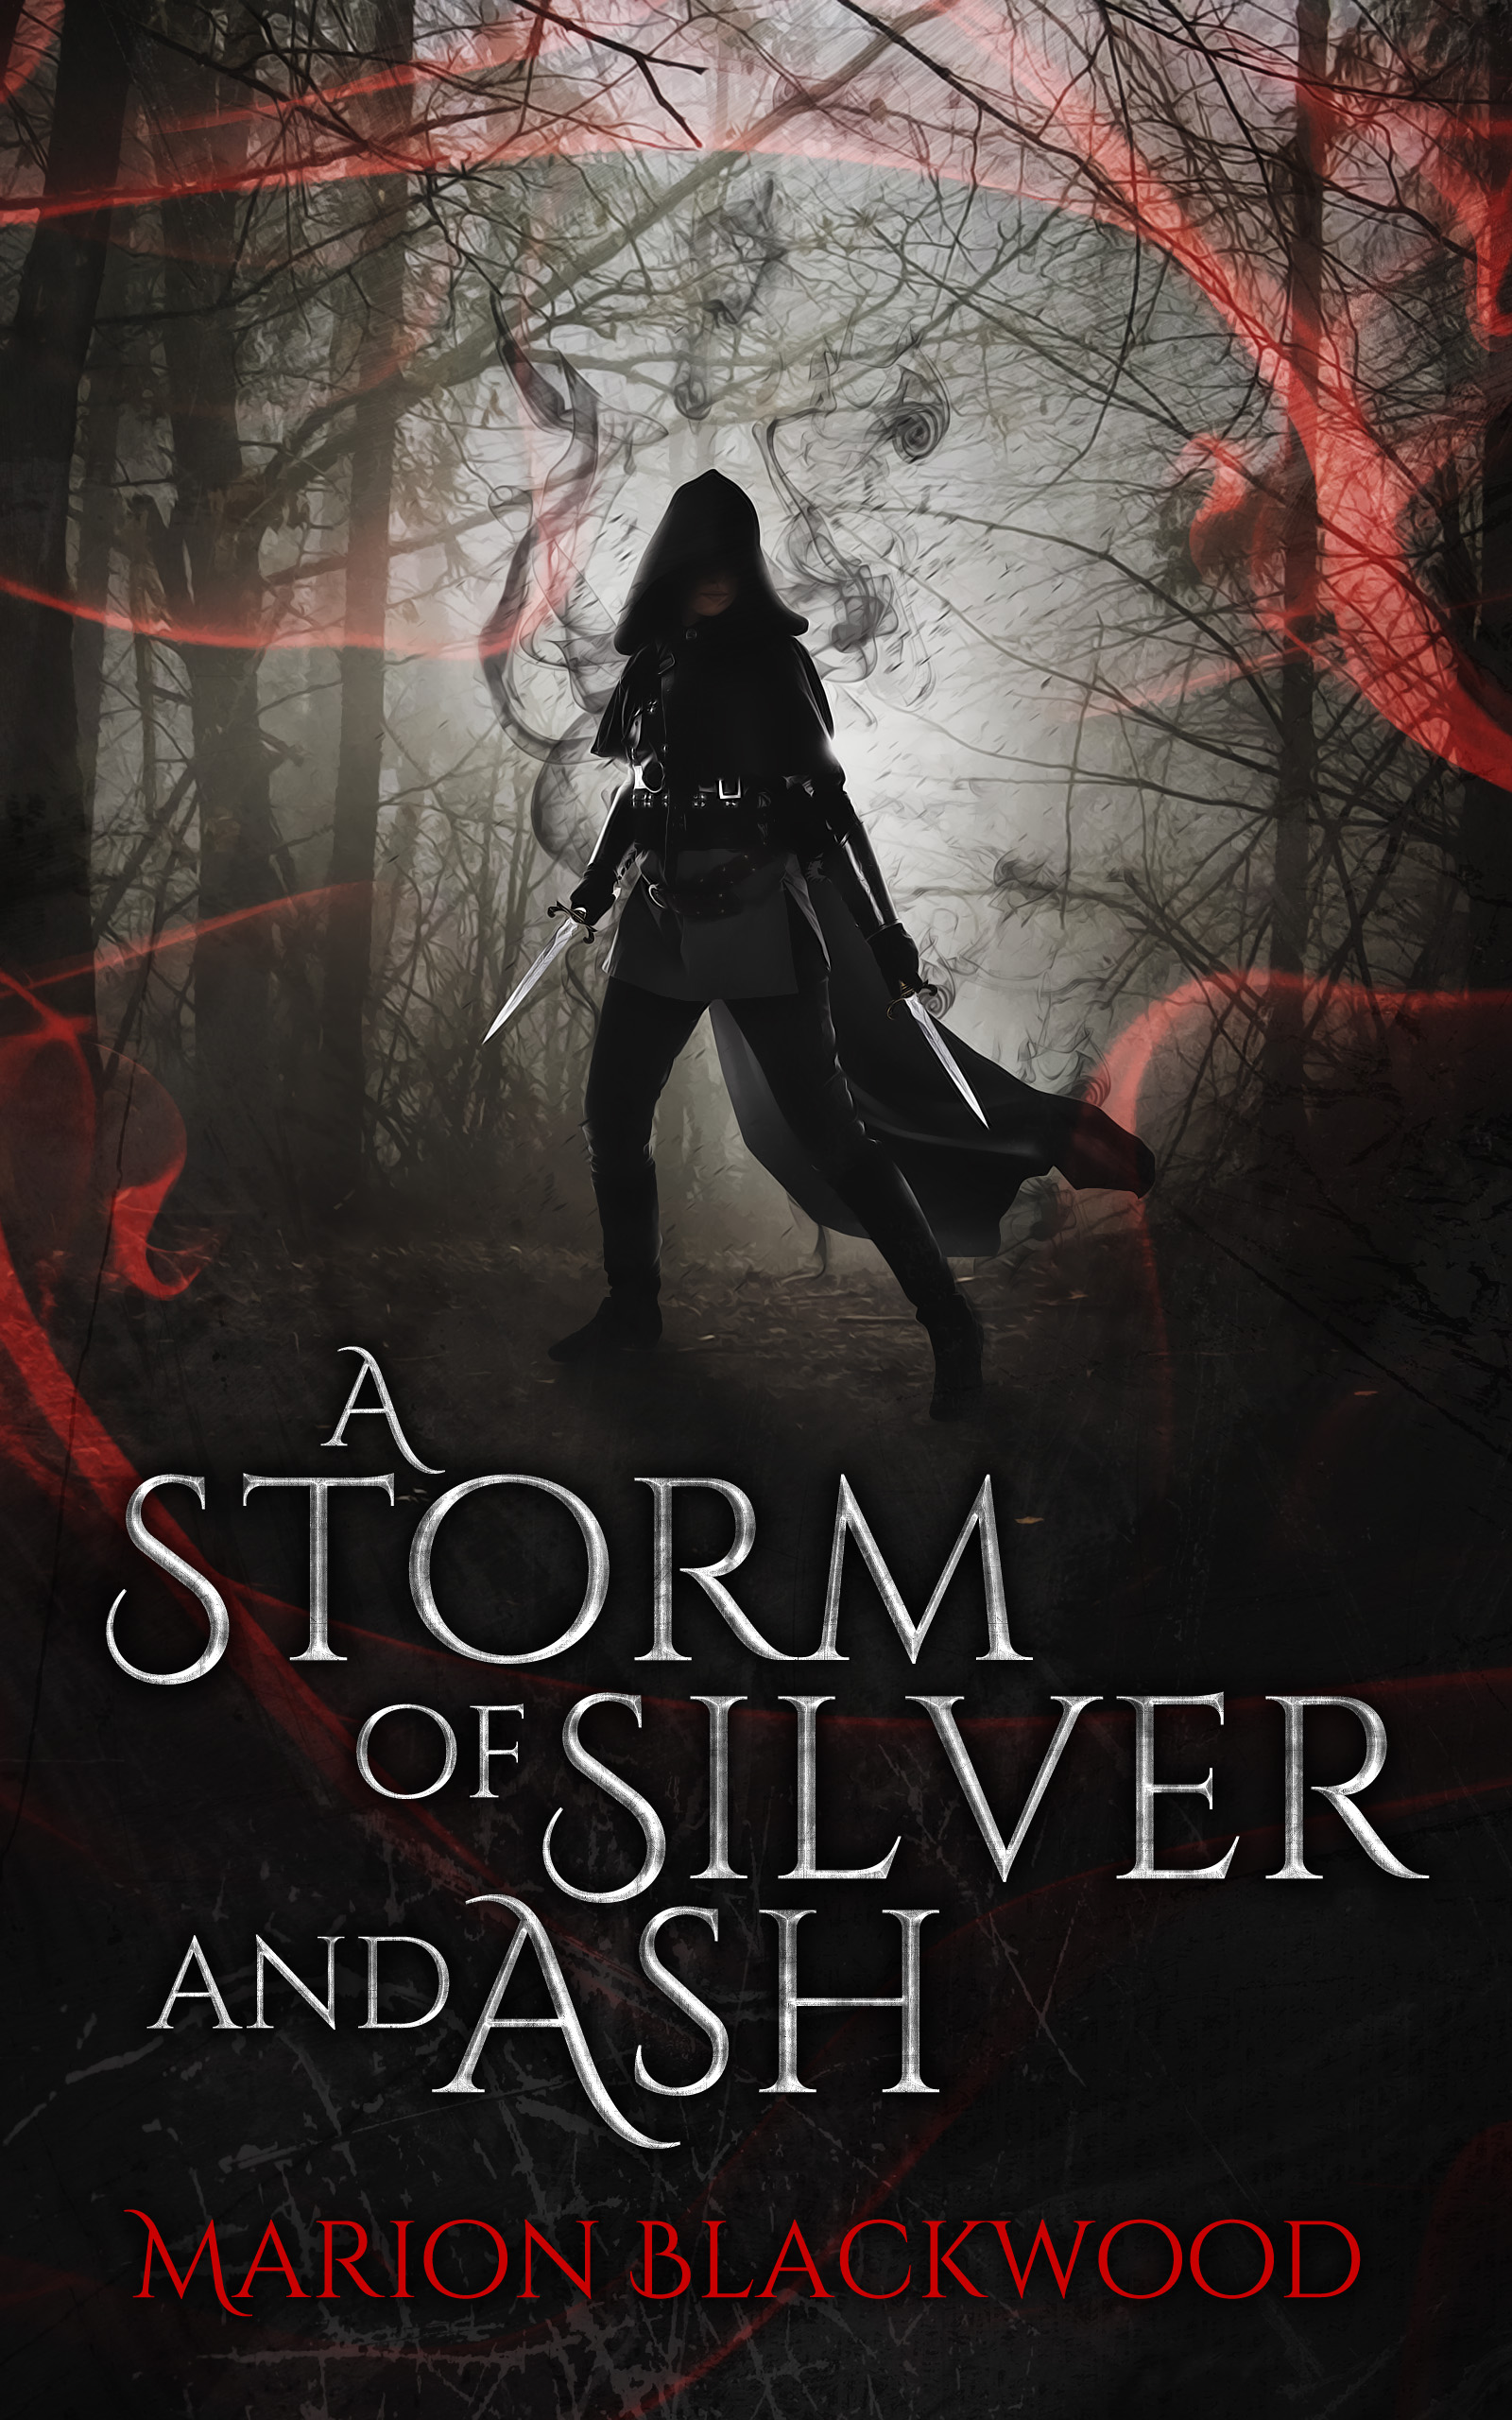 A Storm of Silver and Ash by Marion Blackwood